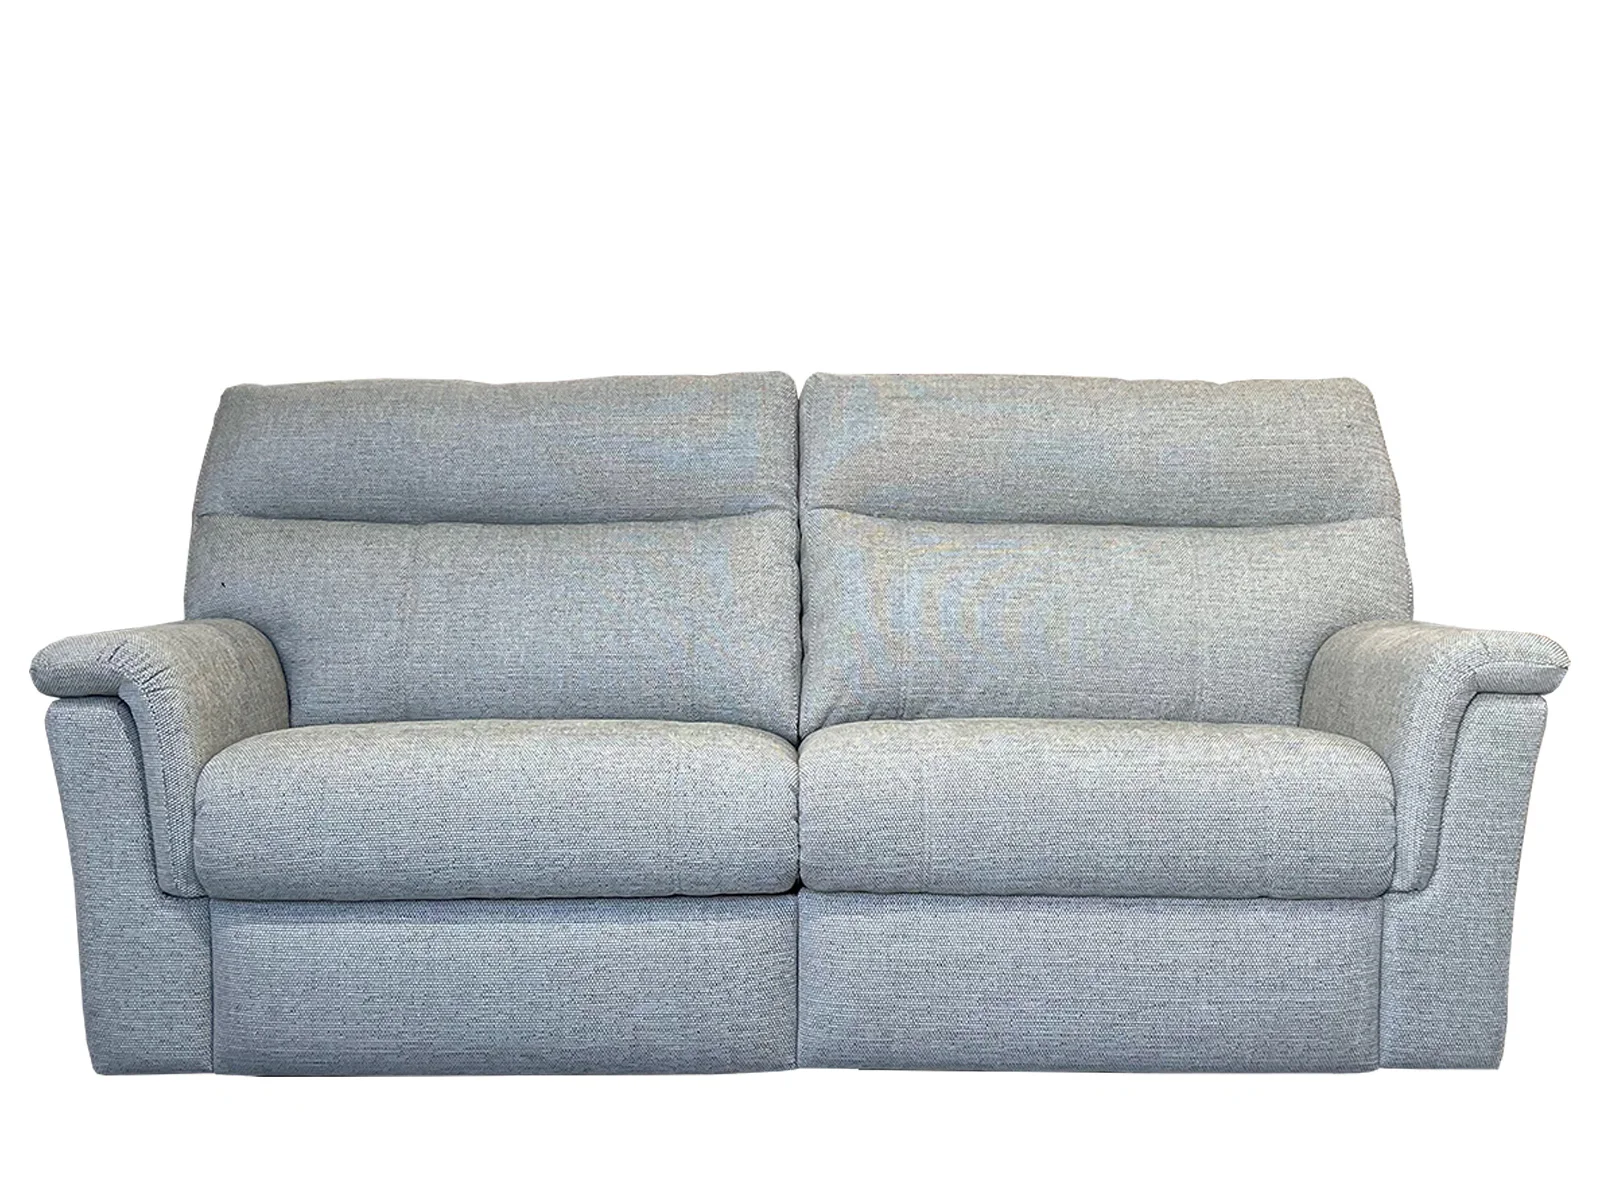 Large Power Recliner Sofa With Adjustable Headrest And Lumbar Support